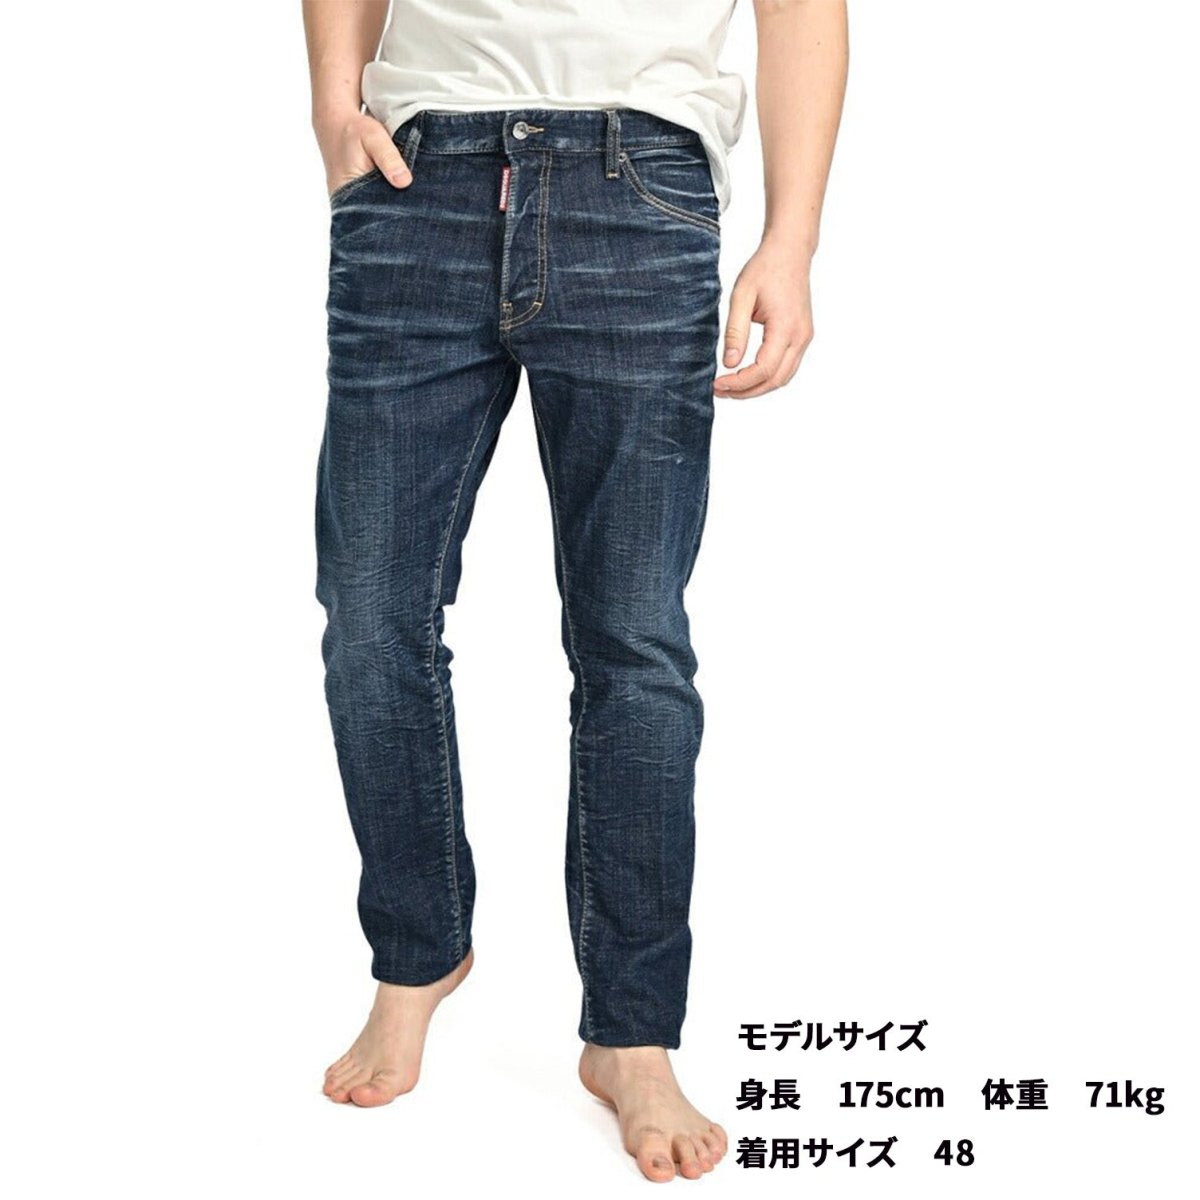 24SS DSQUARED2 COOL GUY JEAN ストレッチデニムジーンズ / メンズ – GUARDAROBA MILANO  OFFICIAL STORE